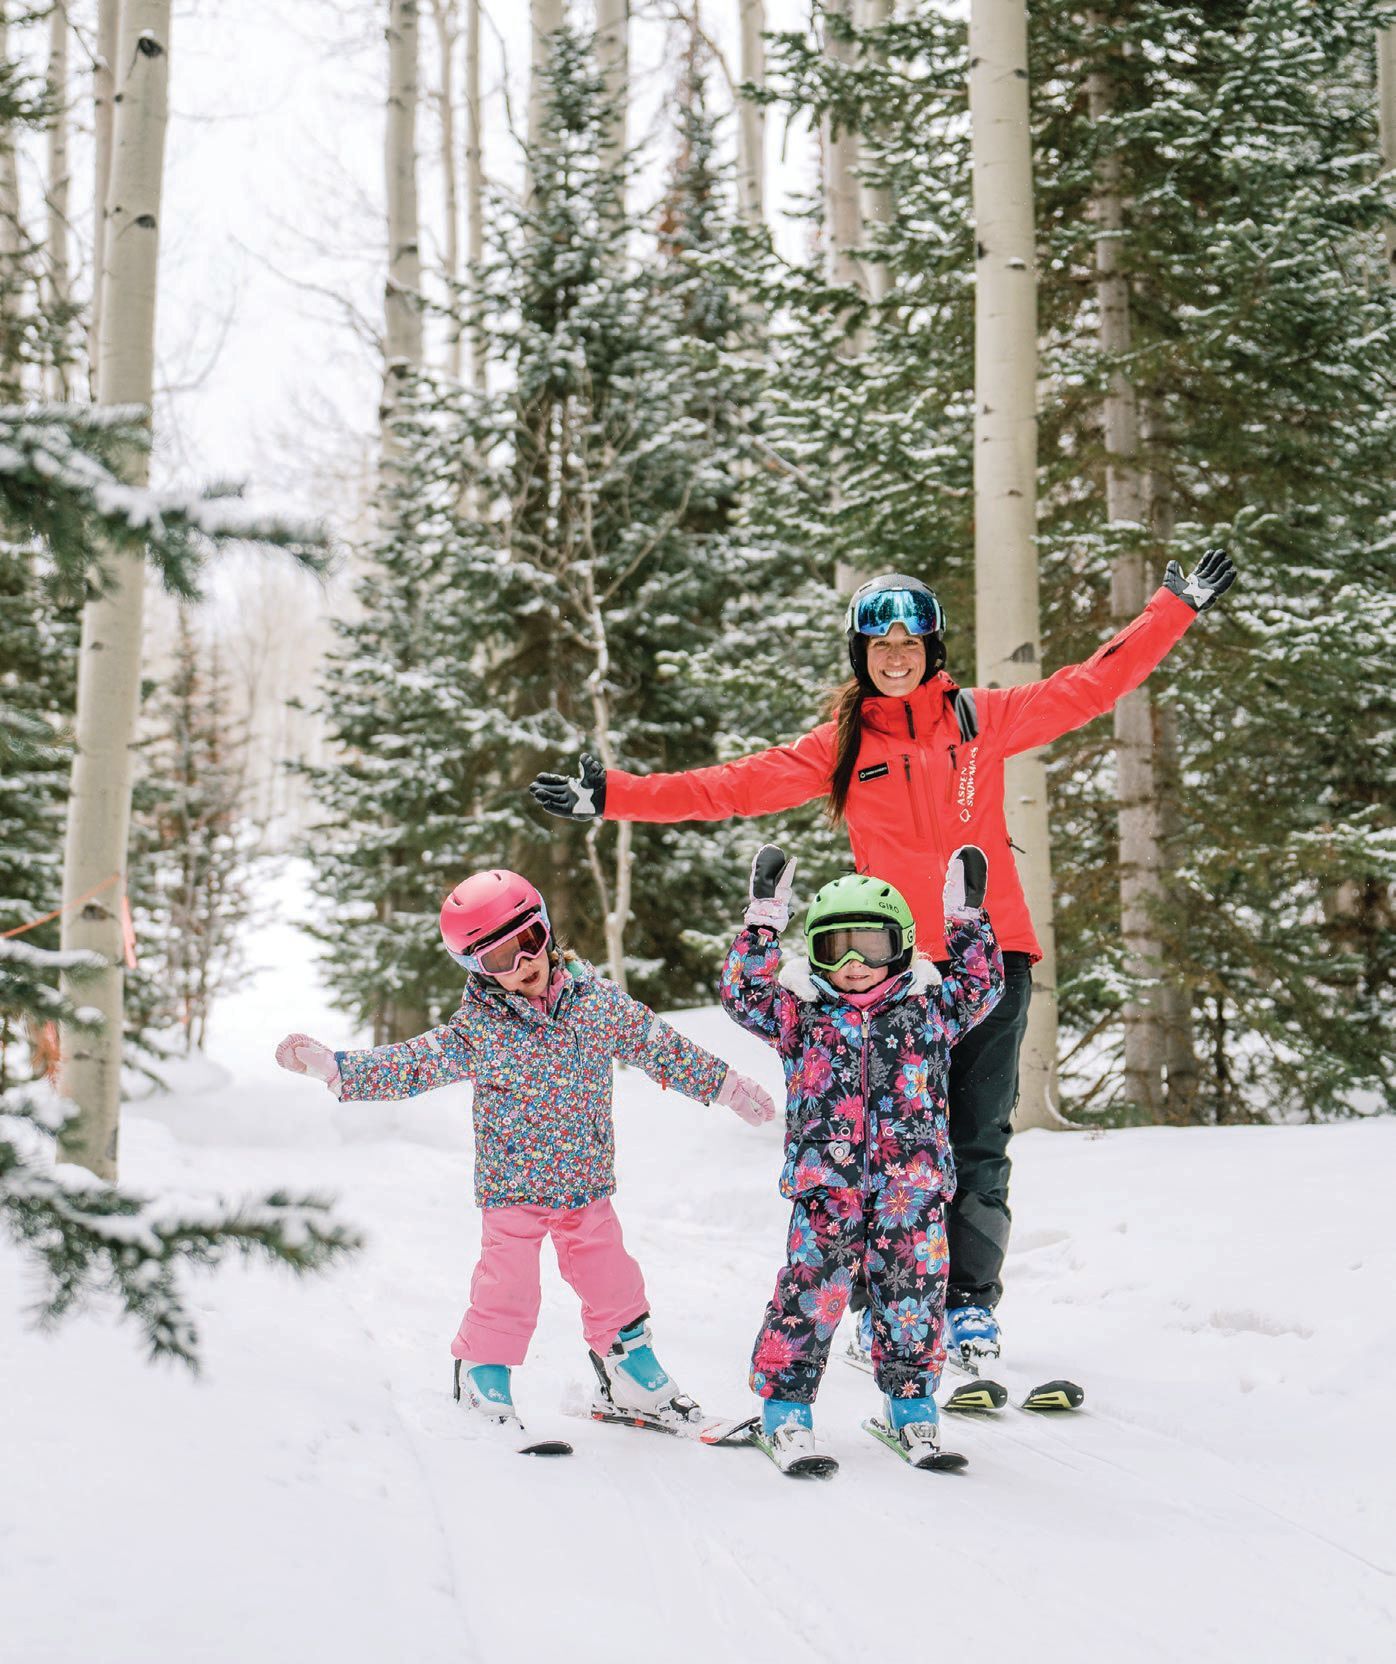 Kids can ski Buttermilk and its child-friendly trails. PHOTO BY TAMARA SUSA/BTX PRODUCTIONS